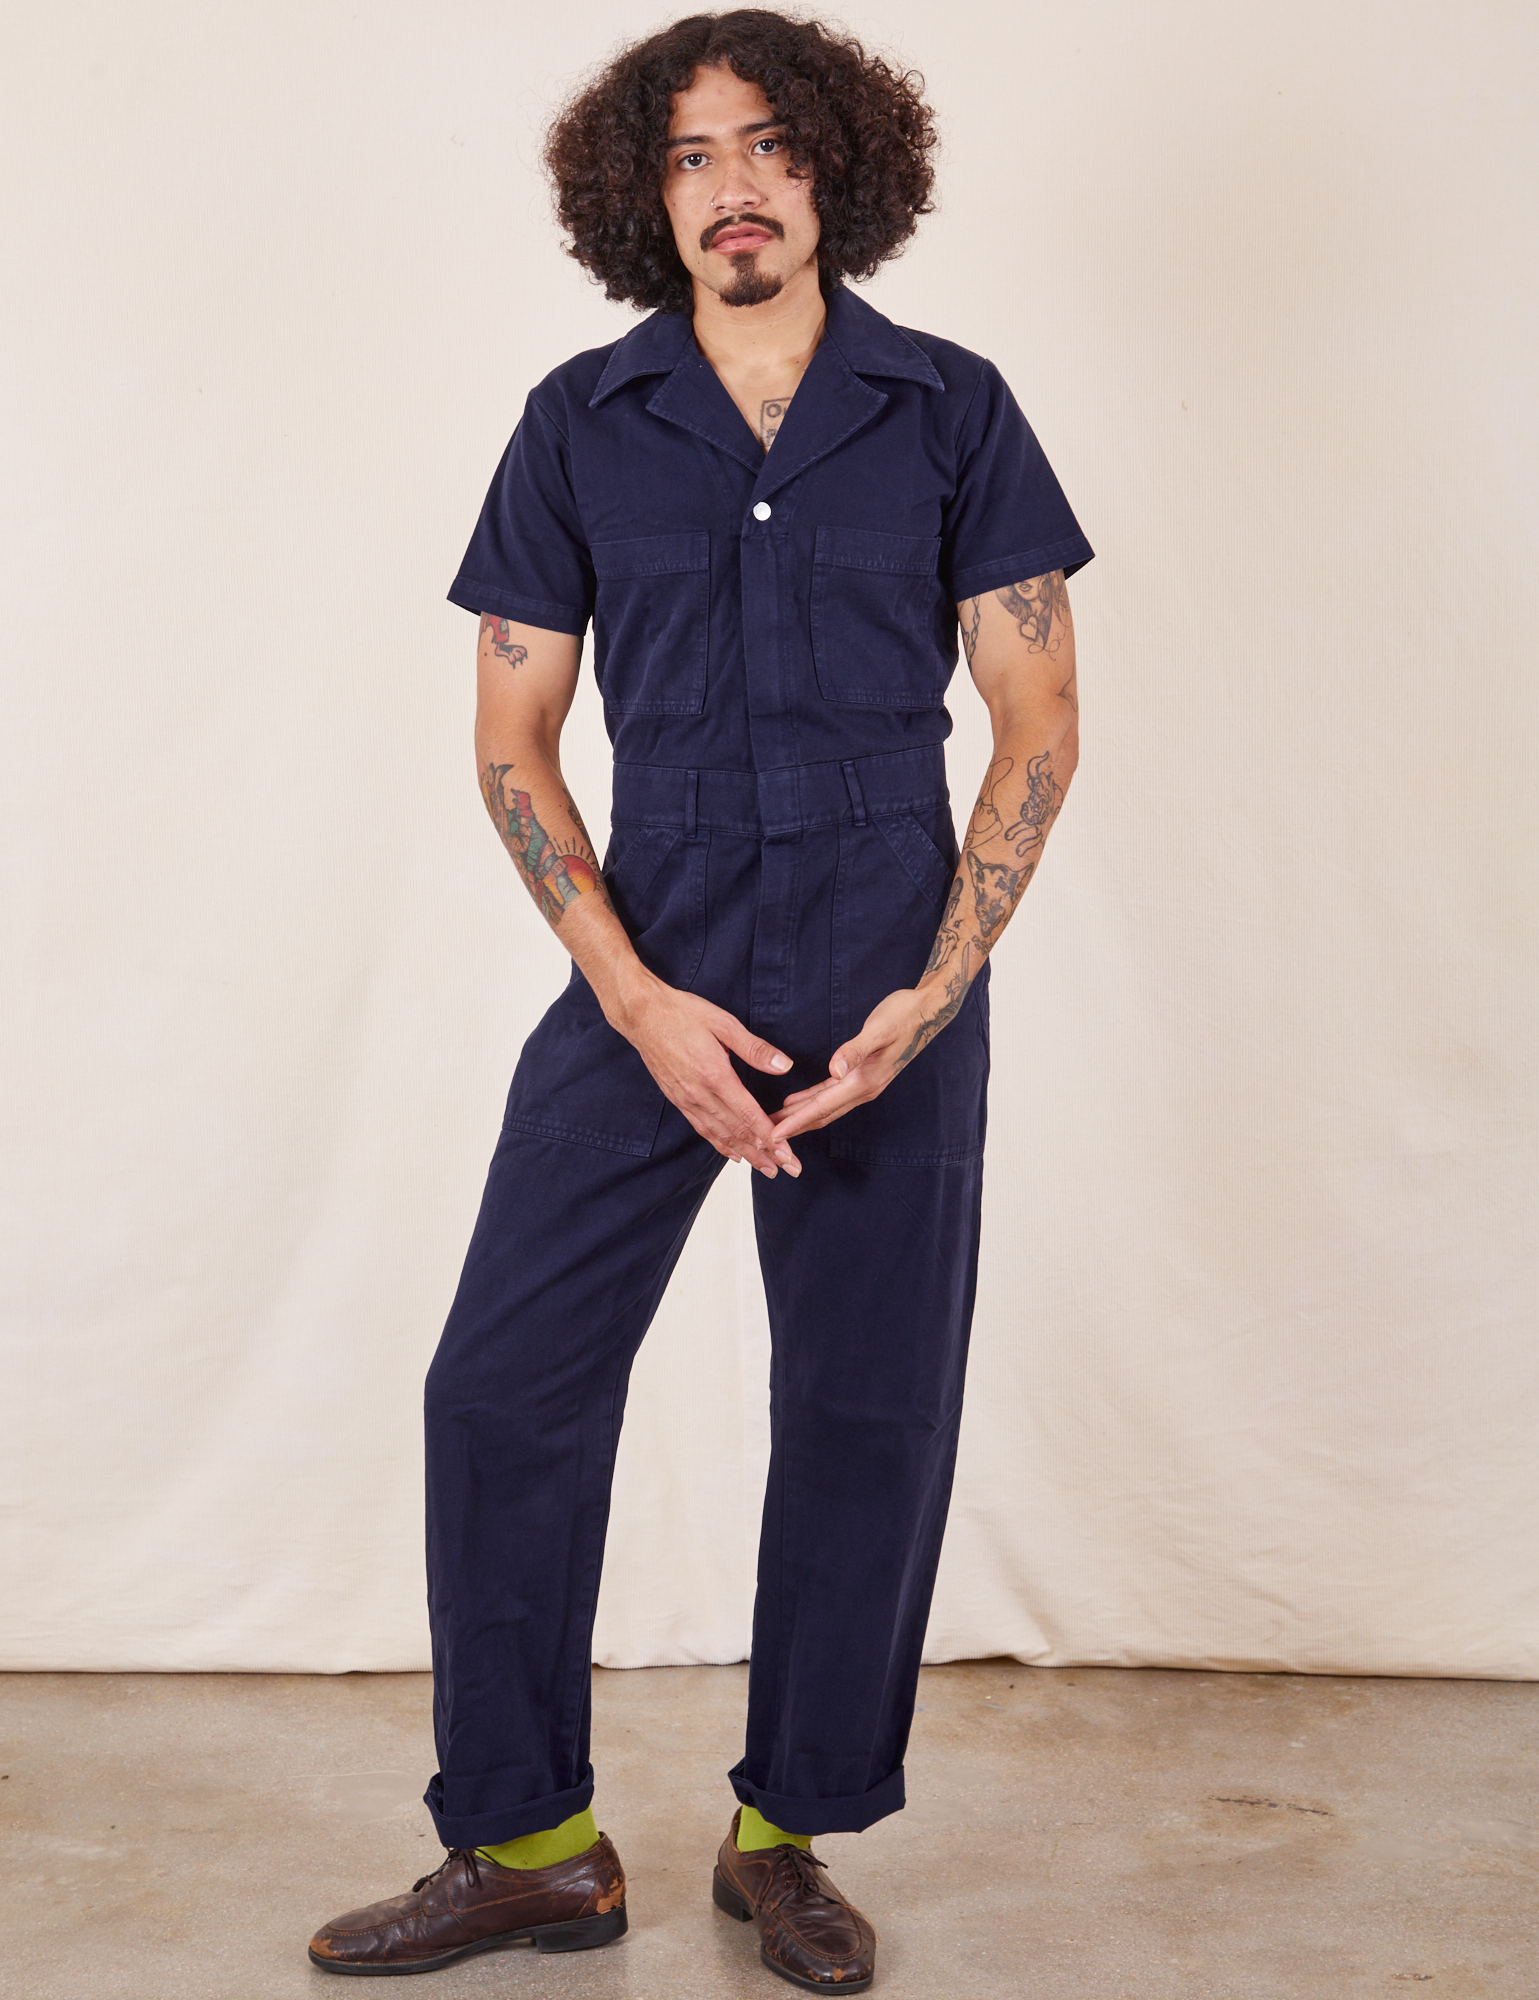 Jesse is 5&#39;8&quot; and wearing S Short Sleeve Jumpsuit in Navy Blue